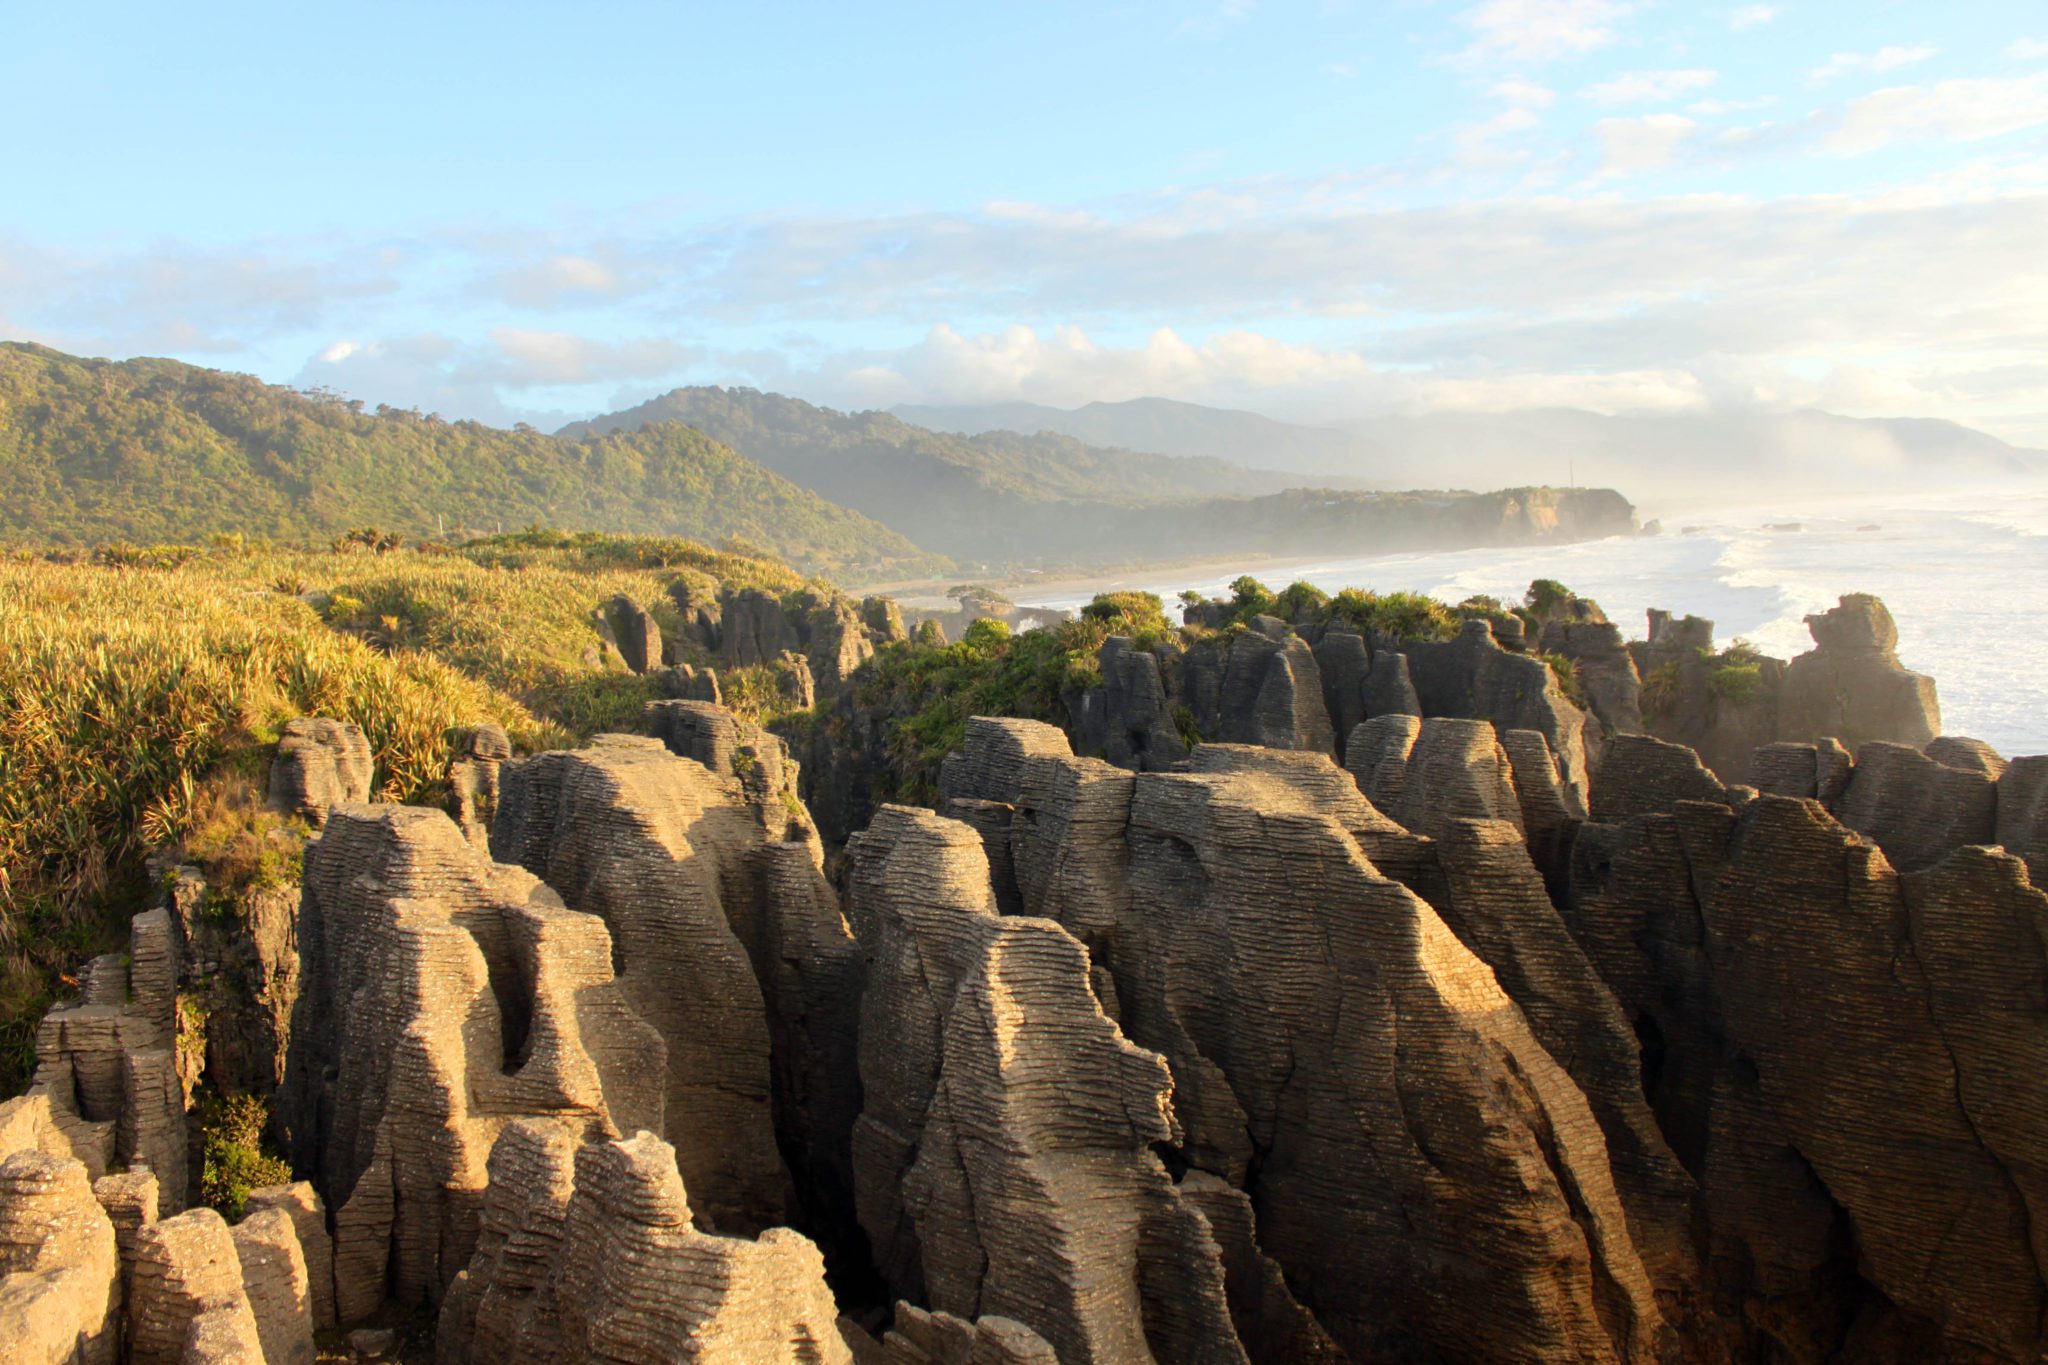 New Zealand's Pancake Rocks are one of the most impressive natural formations on the entire island | 11 things to see on New Zealand's West Coast #newzealand #westcoast #pancakerocks